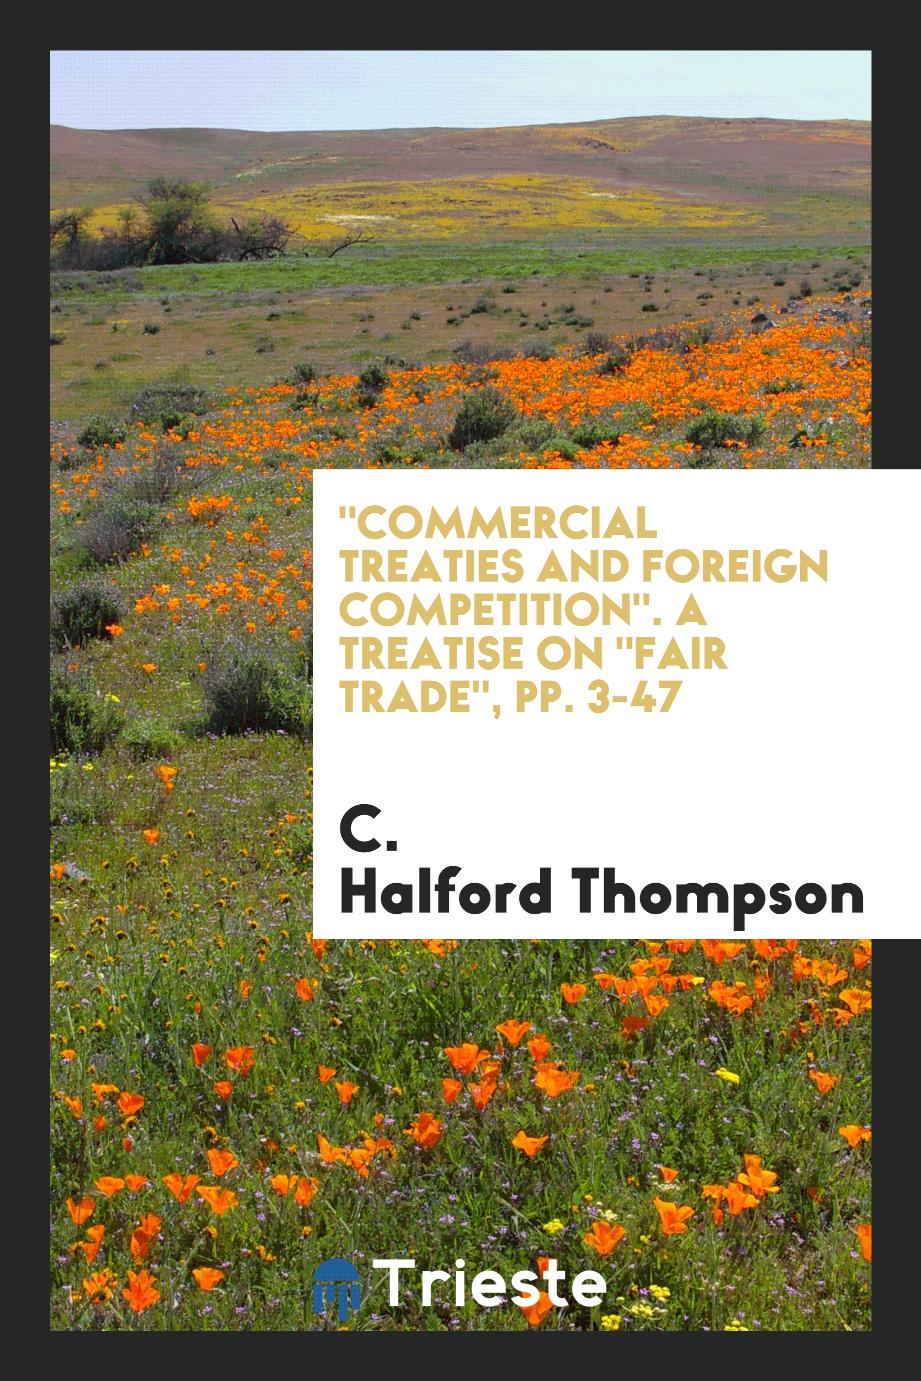 "Commercial Treaties and Foreign Competition". A Treatise on "fair Trade", pp. 3-47